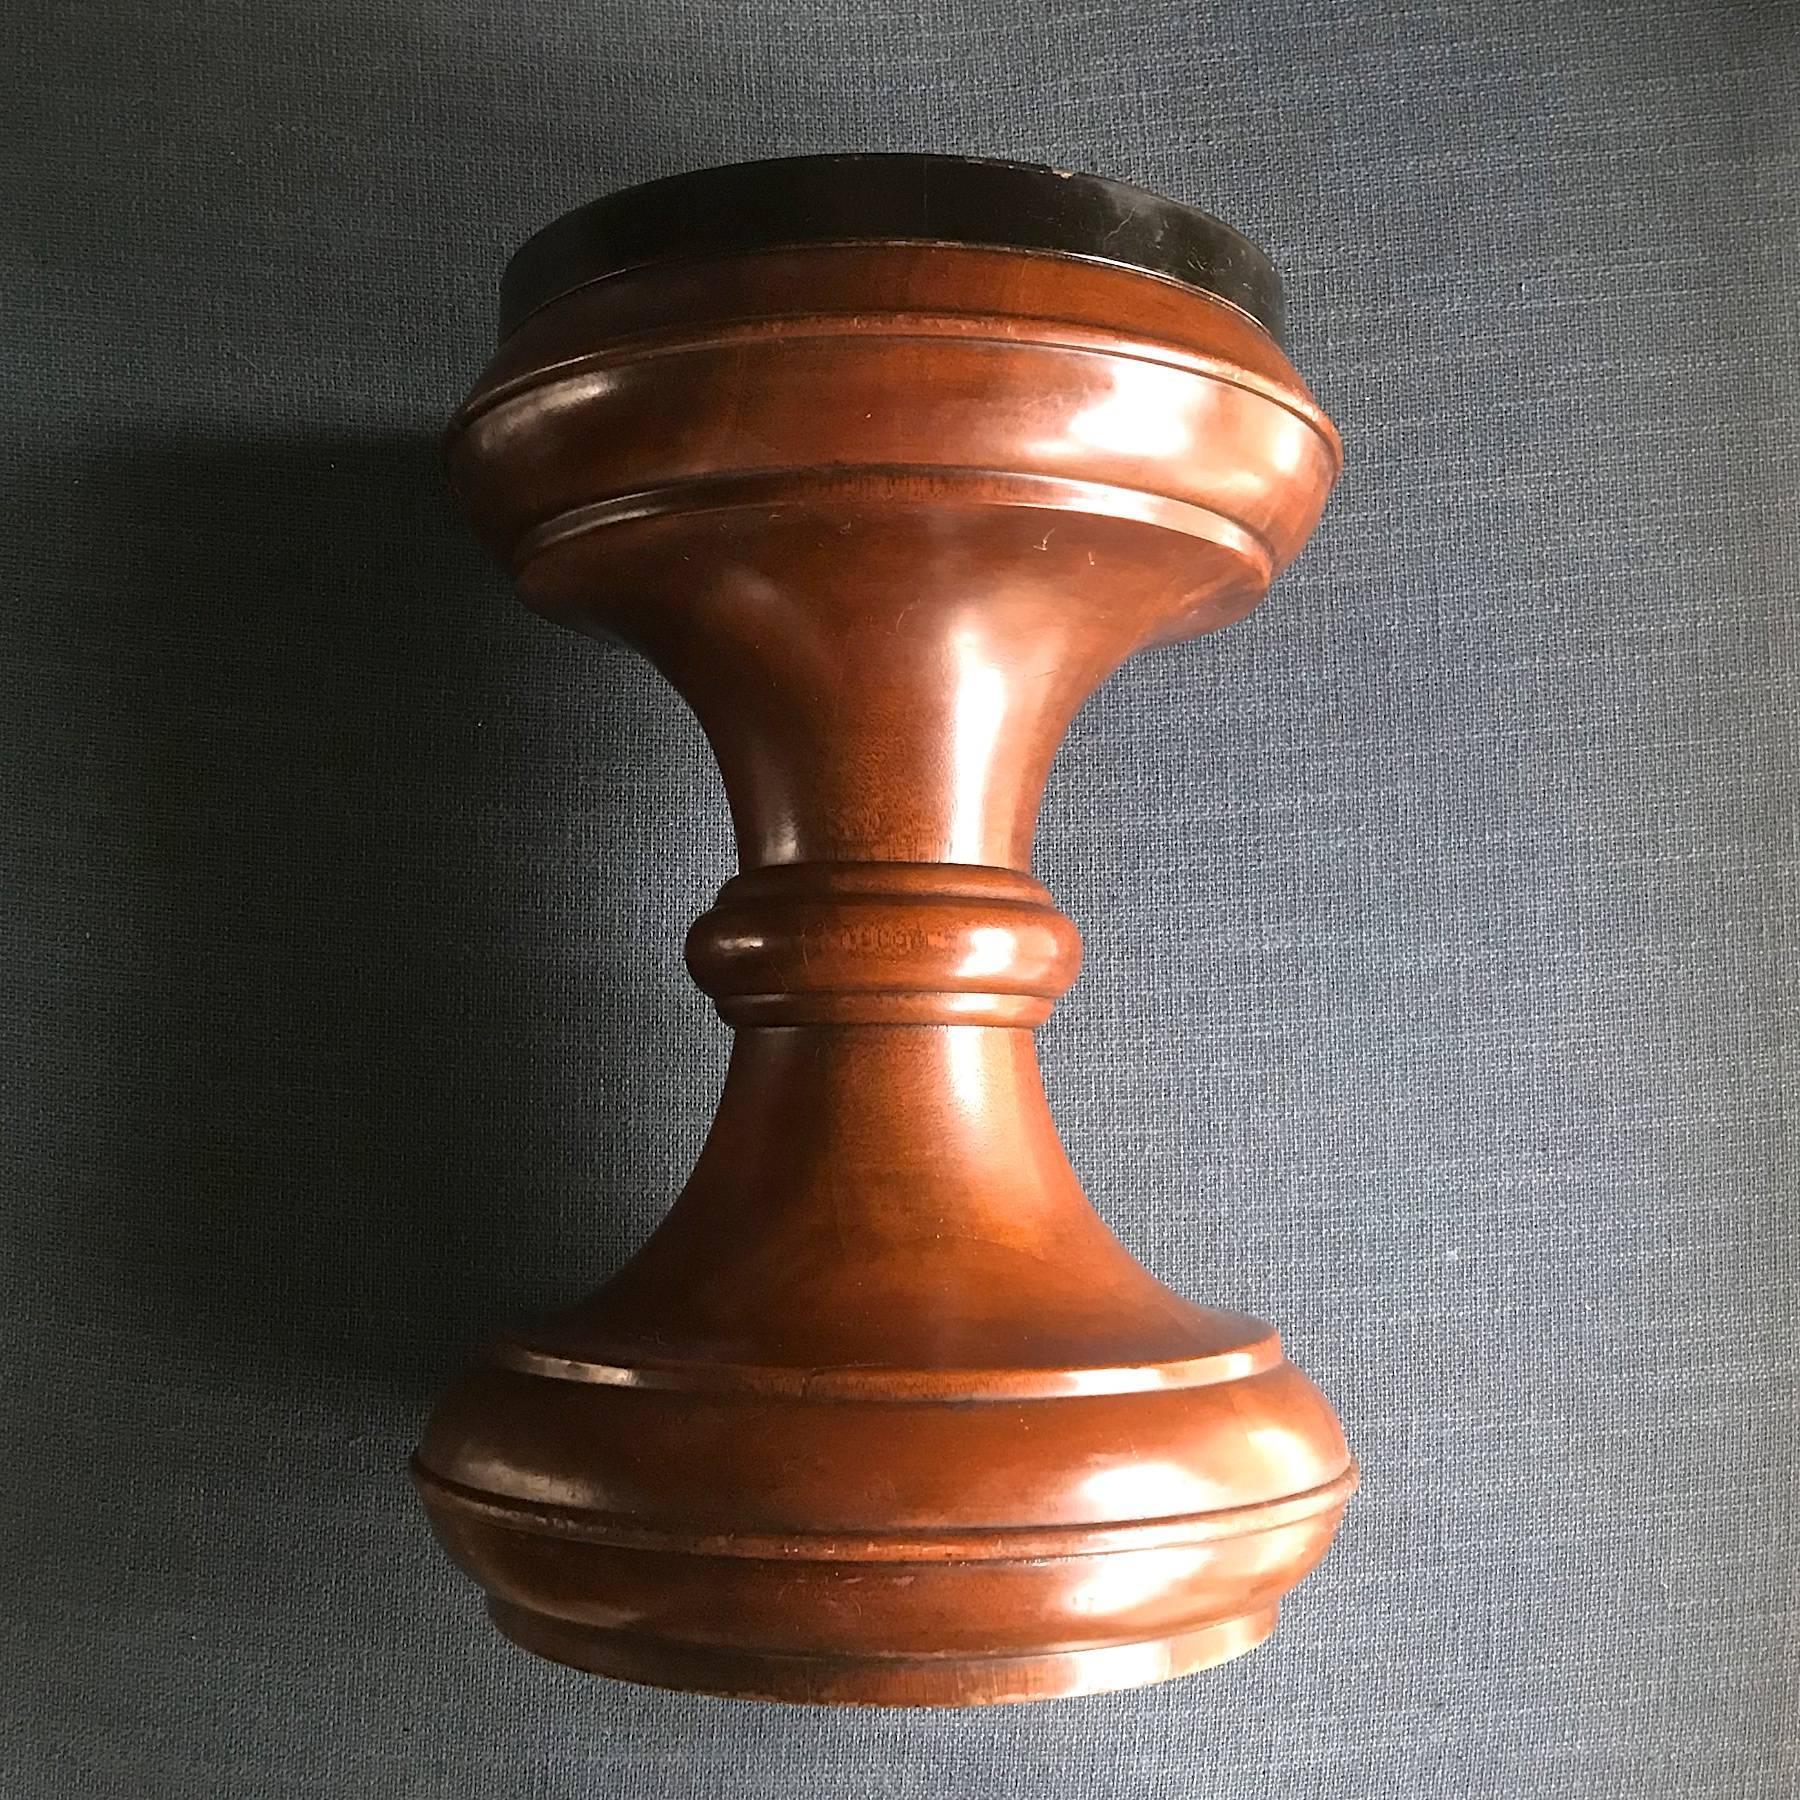 Pair of Vintage Staved Mahogany Chess Piece Table Stool Bohemian Plant Stand In Fair Condition For Sale In Hyattsville, MD